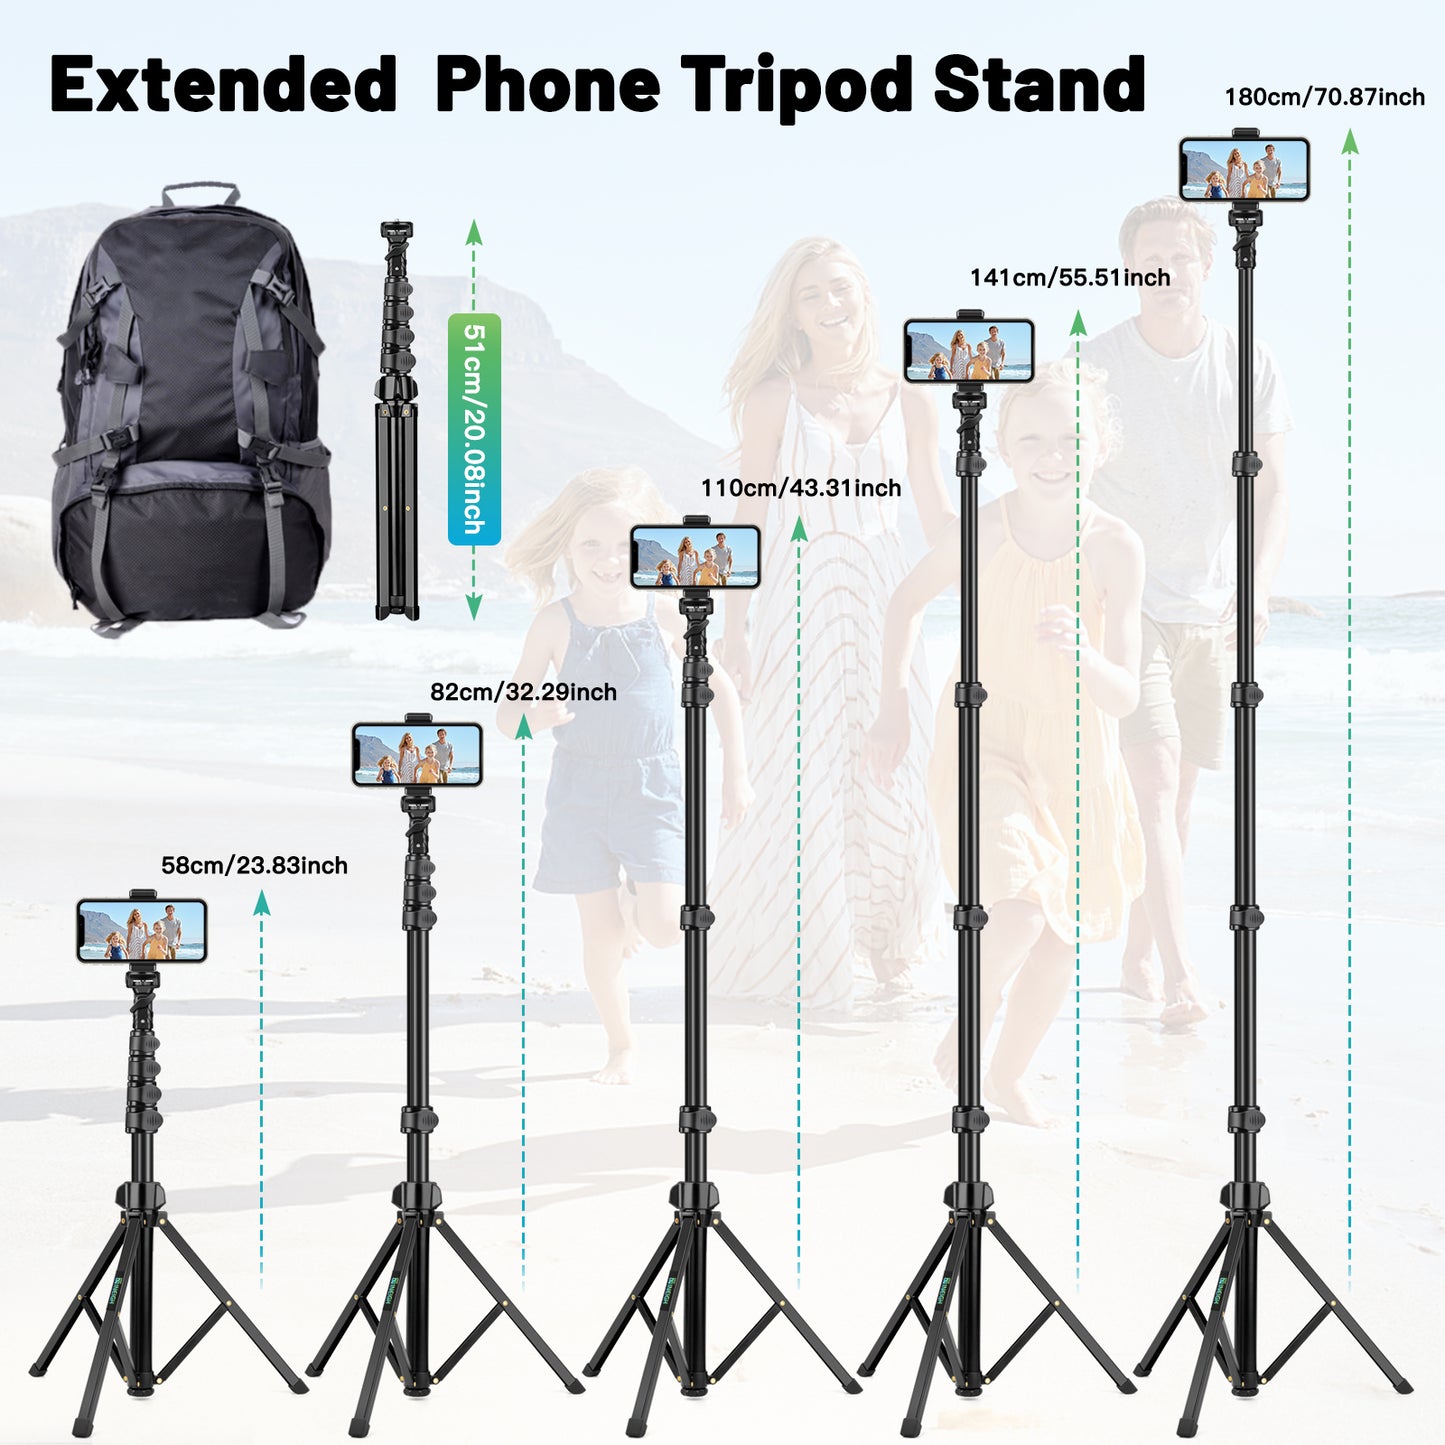 Nineigh Phone Tripod Stand, 70.87inch/180cm Extendable Selfie Stick Tripod Portable Cellphone Tripod with Phone Holder, Compatible with iPhone, Samsung, Huawei, Camera(EU)